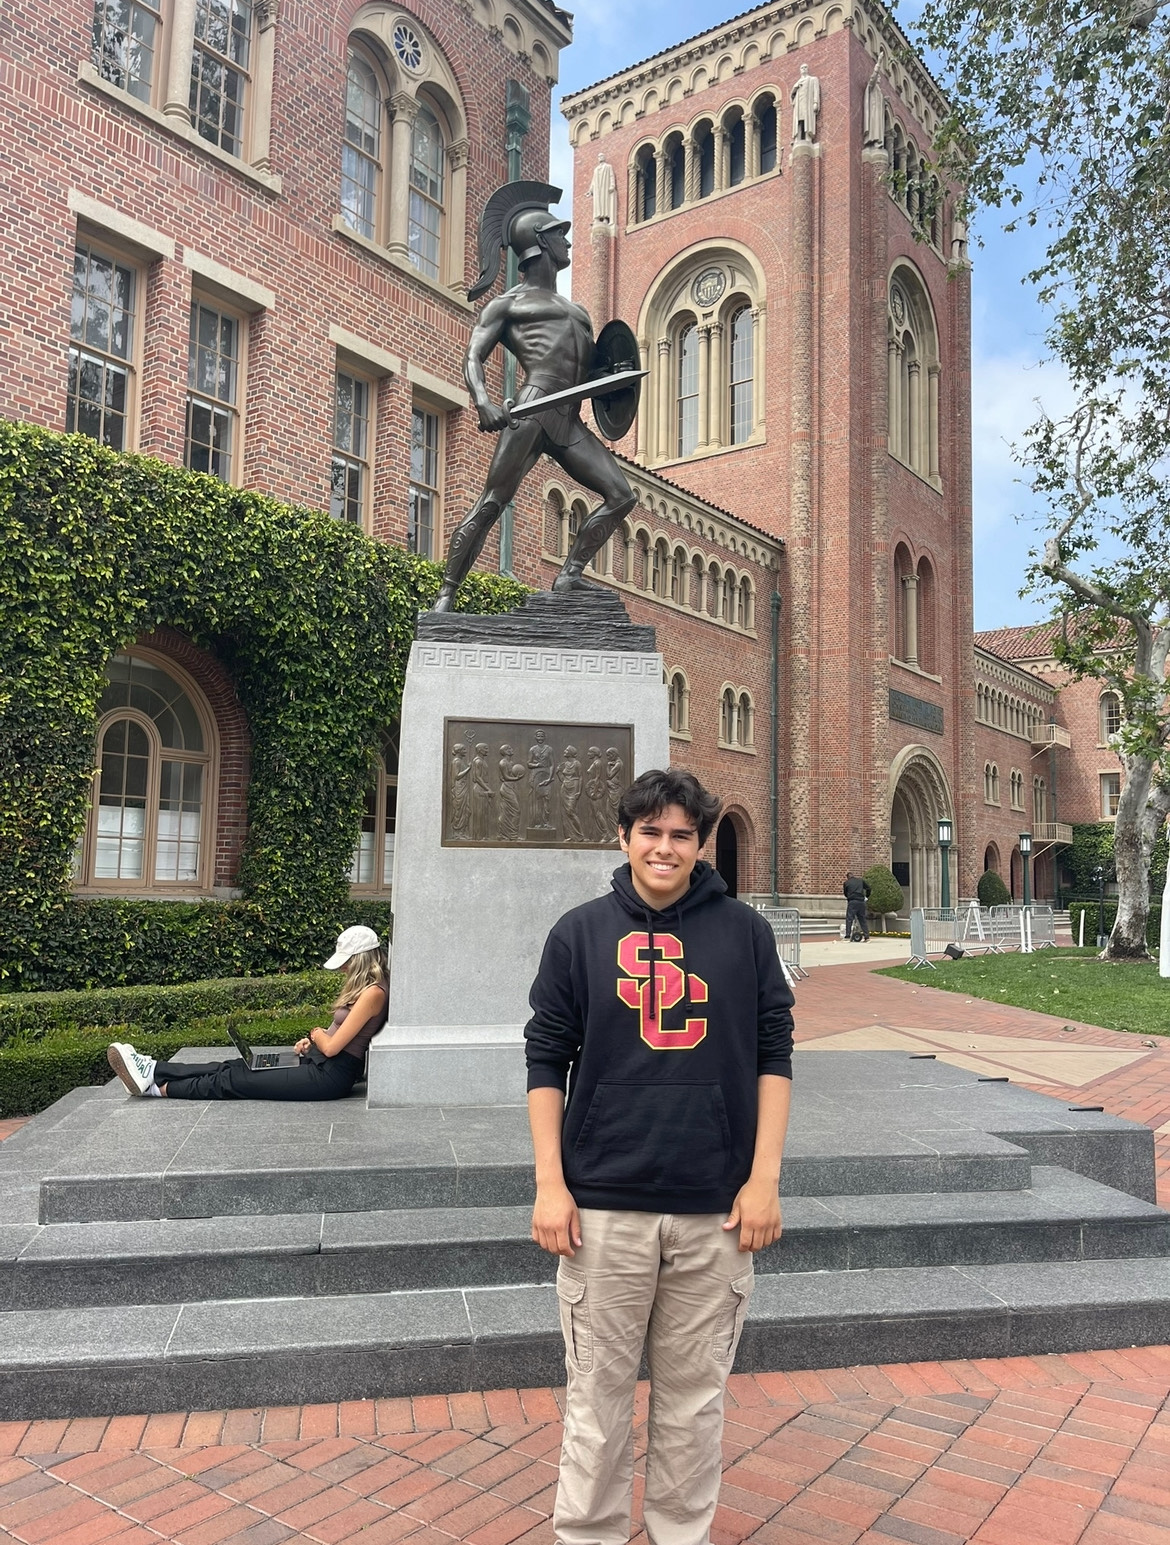 By remaining both consistent and creative within his role in Los Als ASB and MUN, Ramirez hopes to encounter challenges that can lead to success and growth within the next four years at USC.